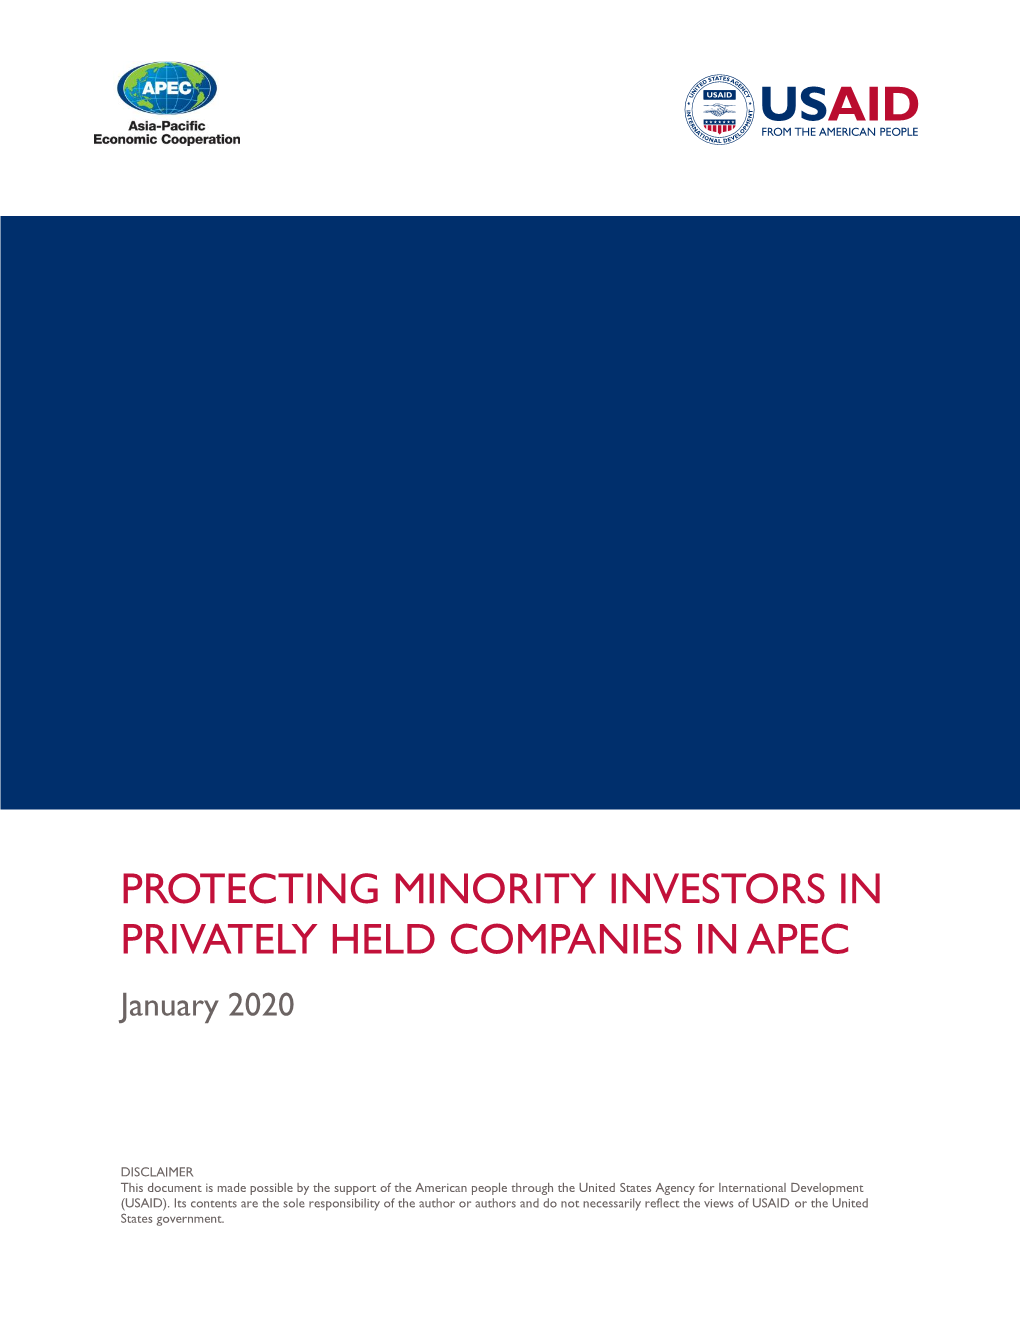 PROTECTING MINORITY INVESTORS in PRIVATELY HELD COMPANIES in APEC January 2020